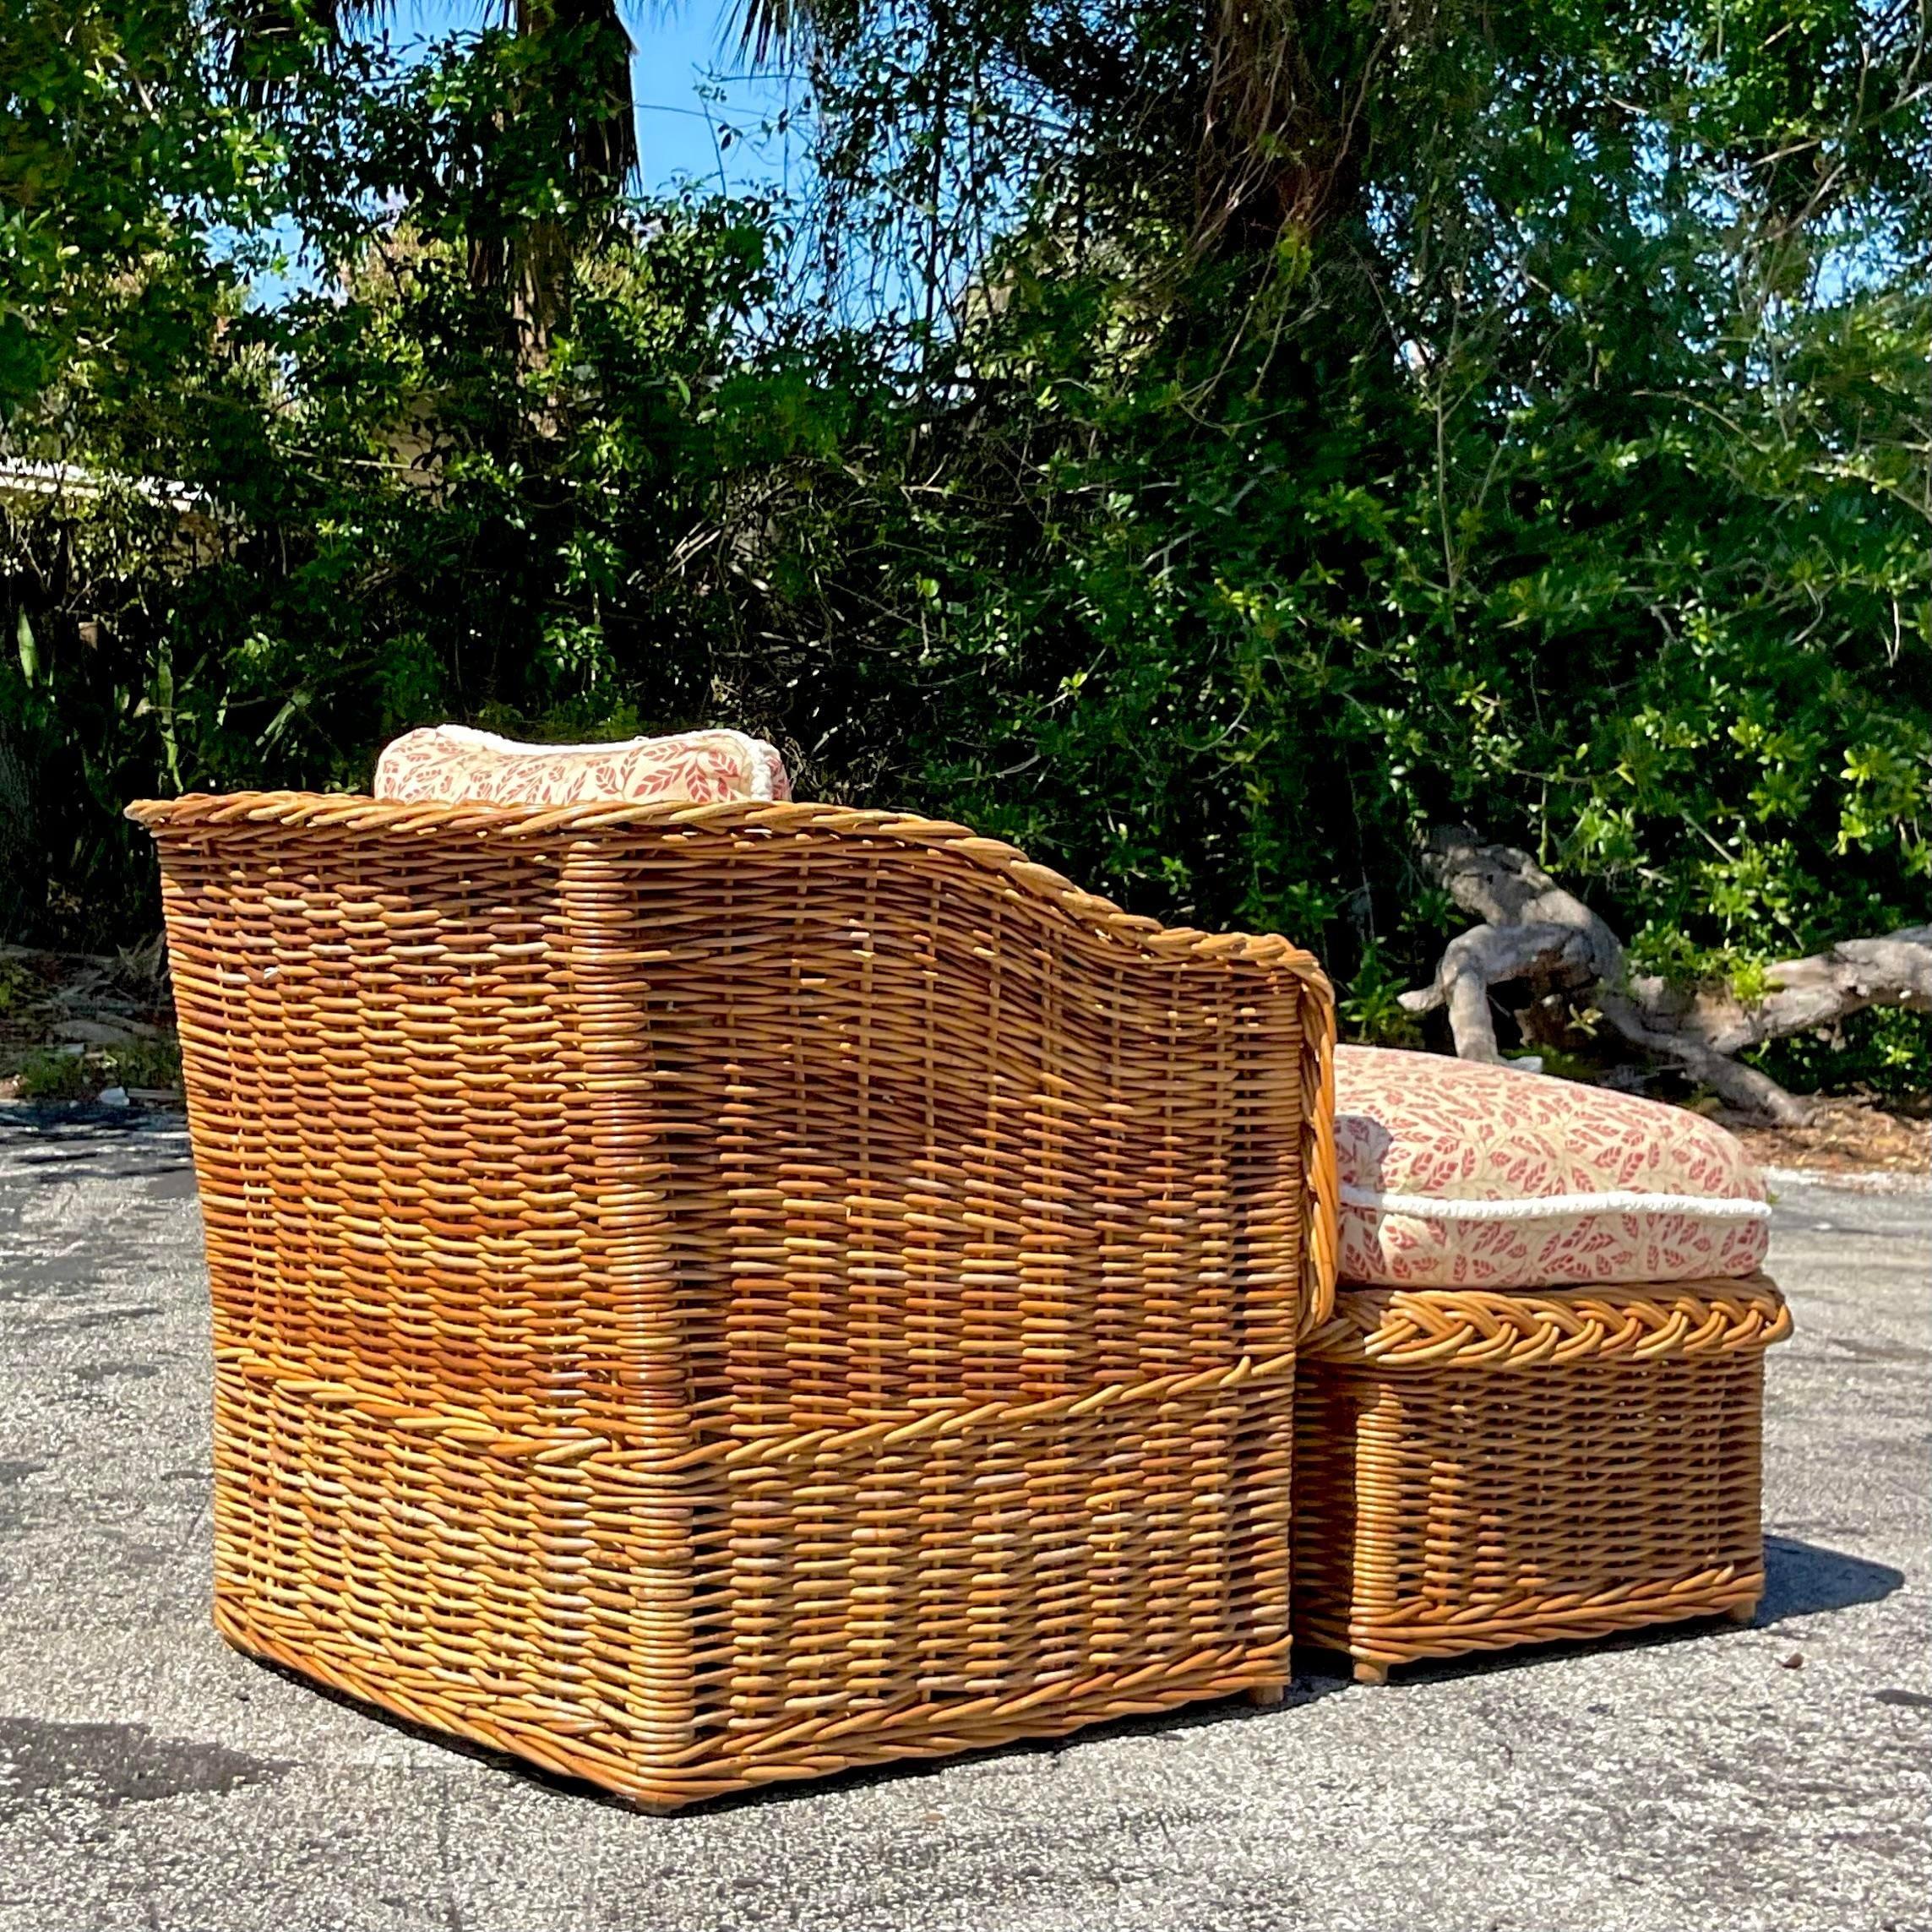 Upholstery Vintage Coastal Wicker Works Braided Rattan Lounge Chair and Ottoman